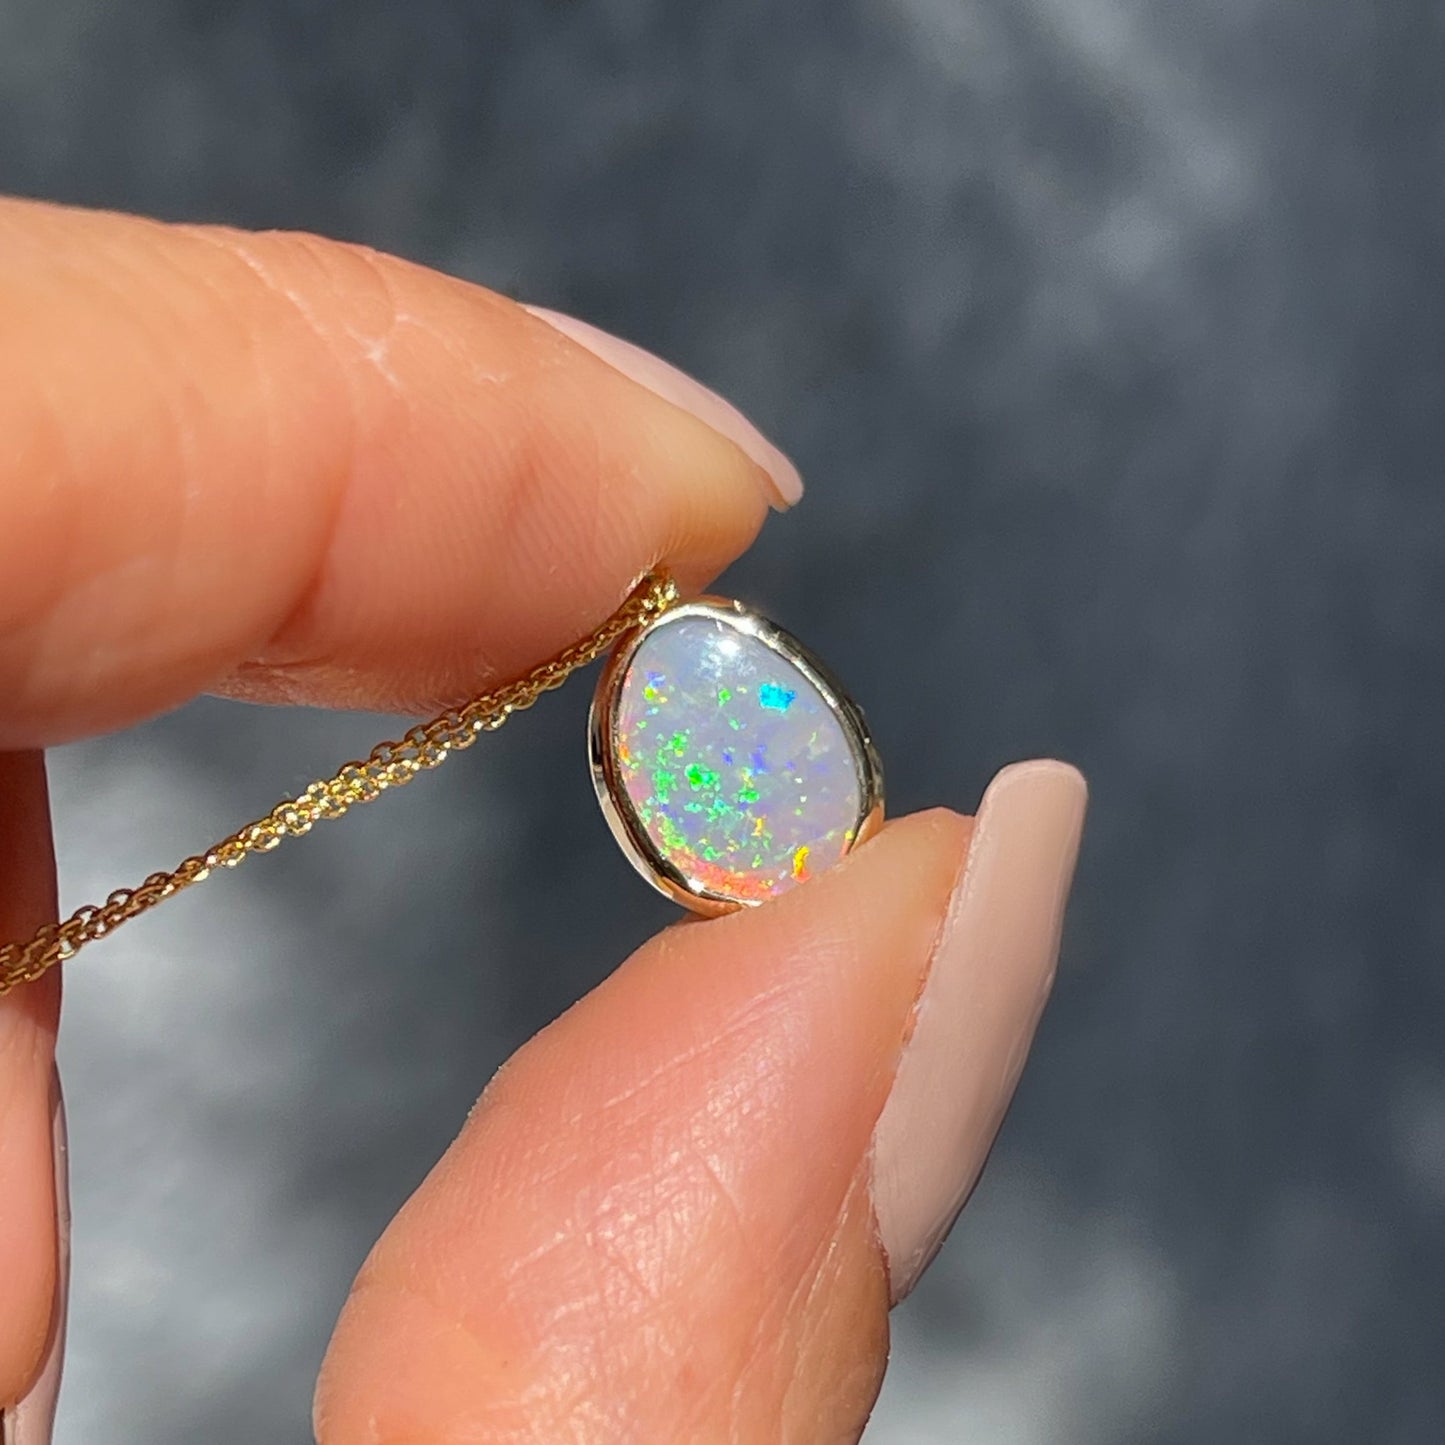 An Australian Opal Necklace by NIXIN Jewelry.  An opal pendant with a black opal stone set in yellow gold.